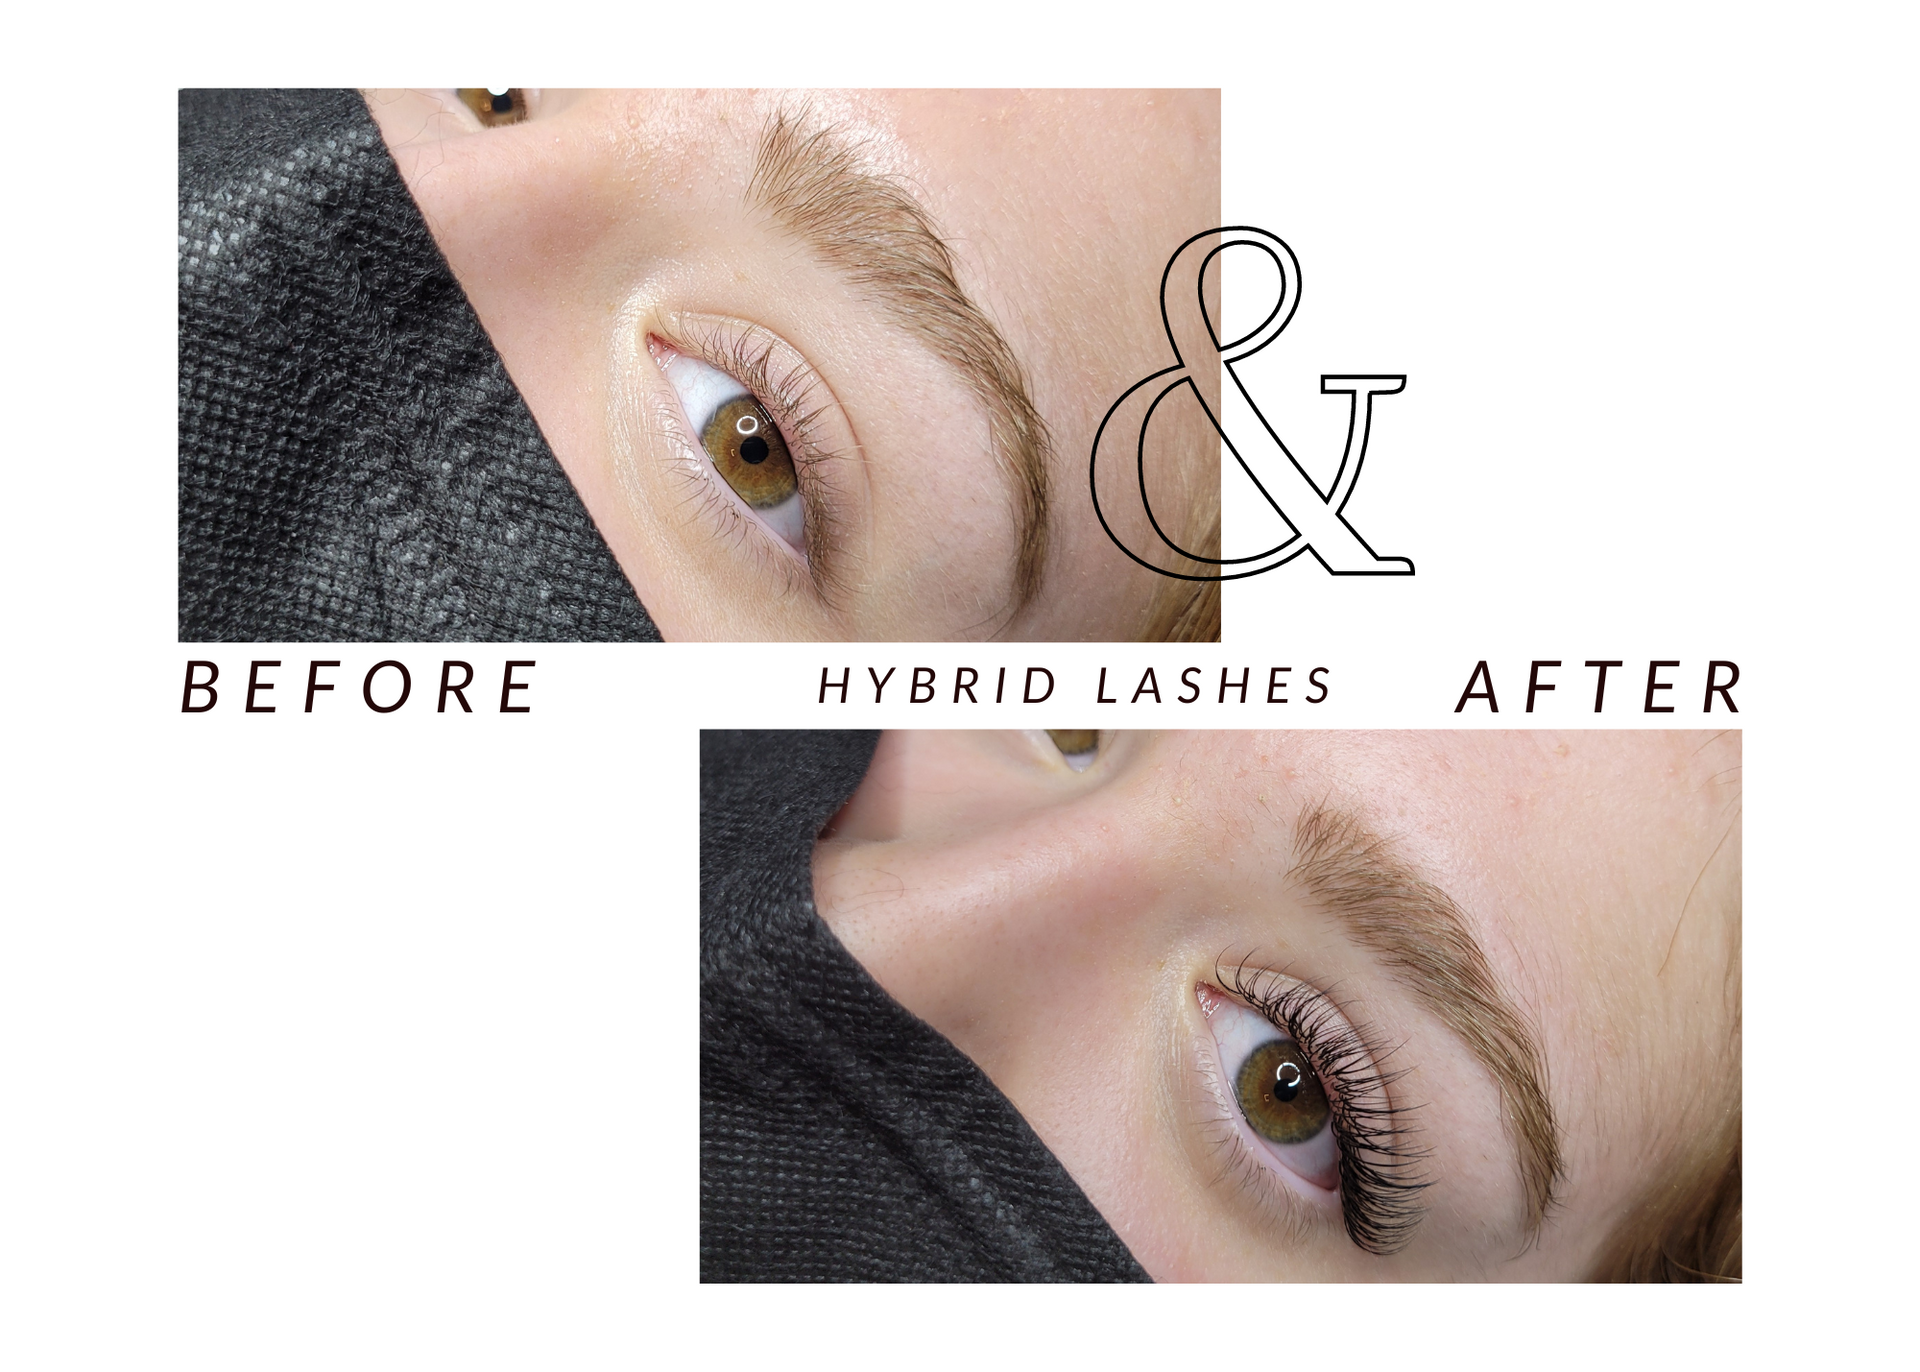 A before and after photo of a woman with hybrid lashes.